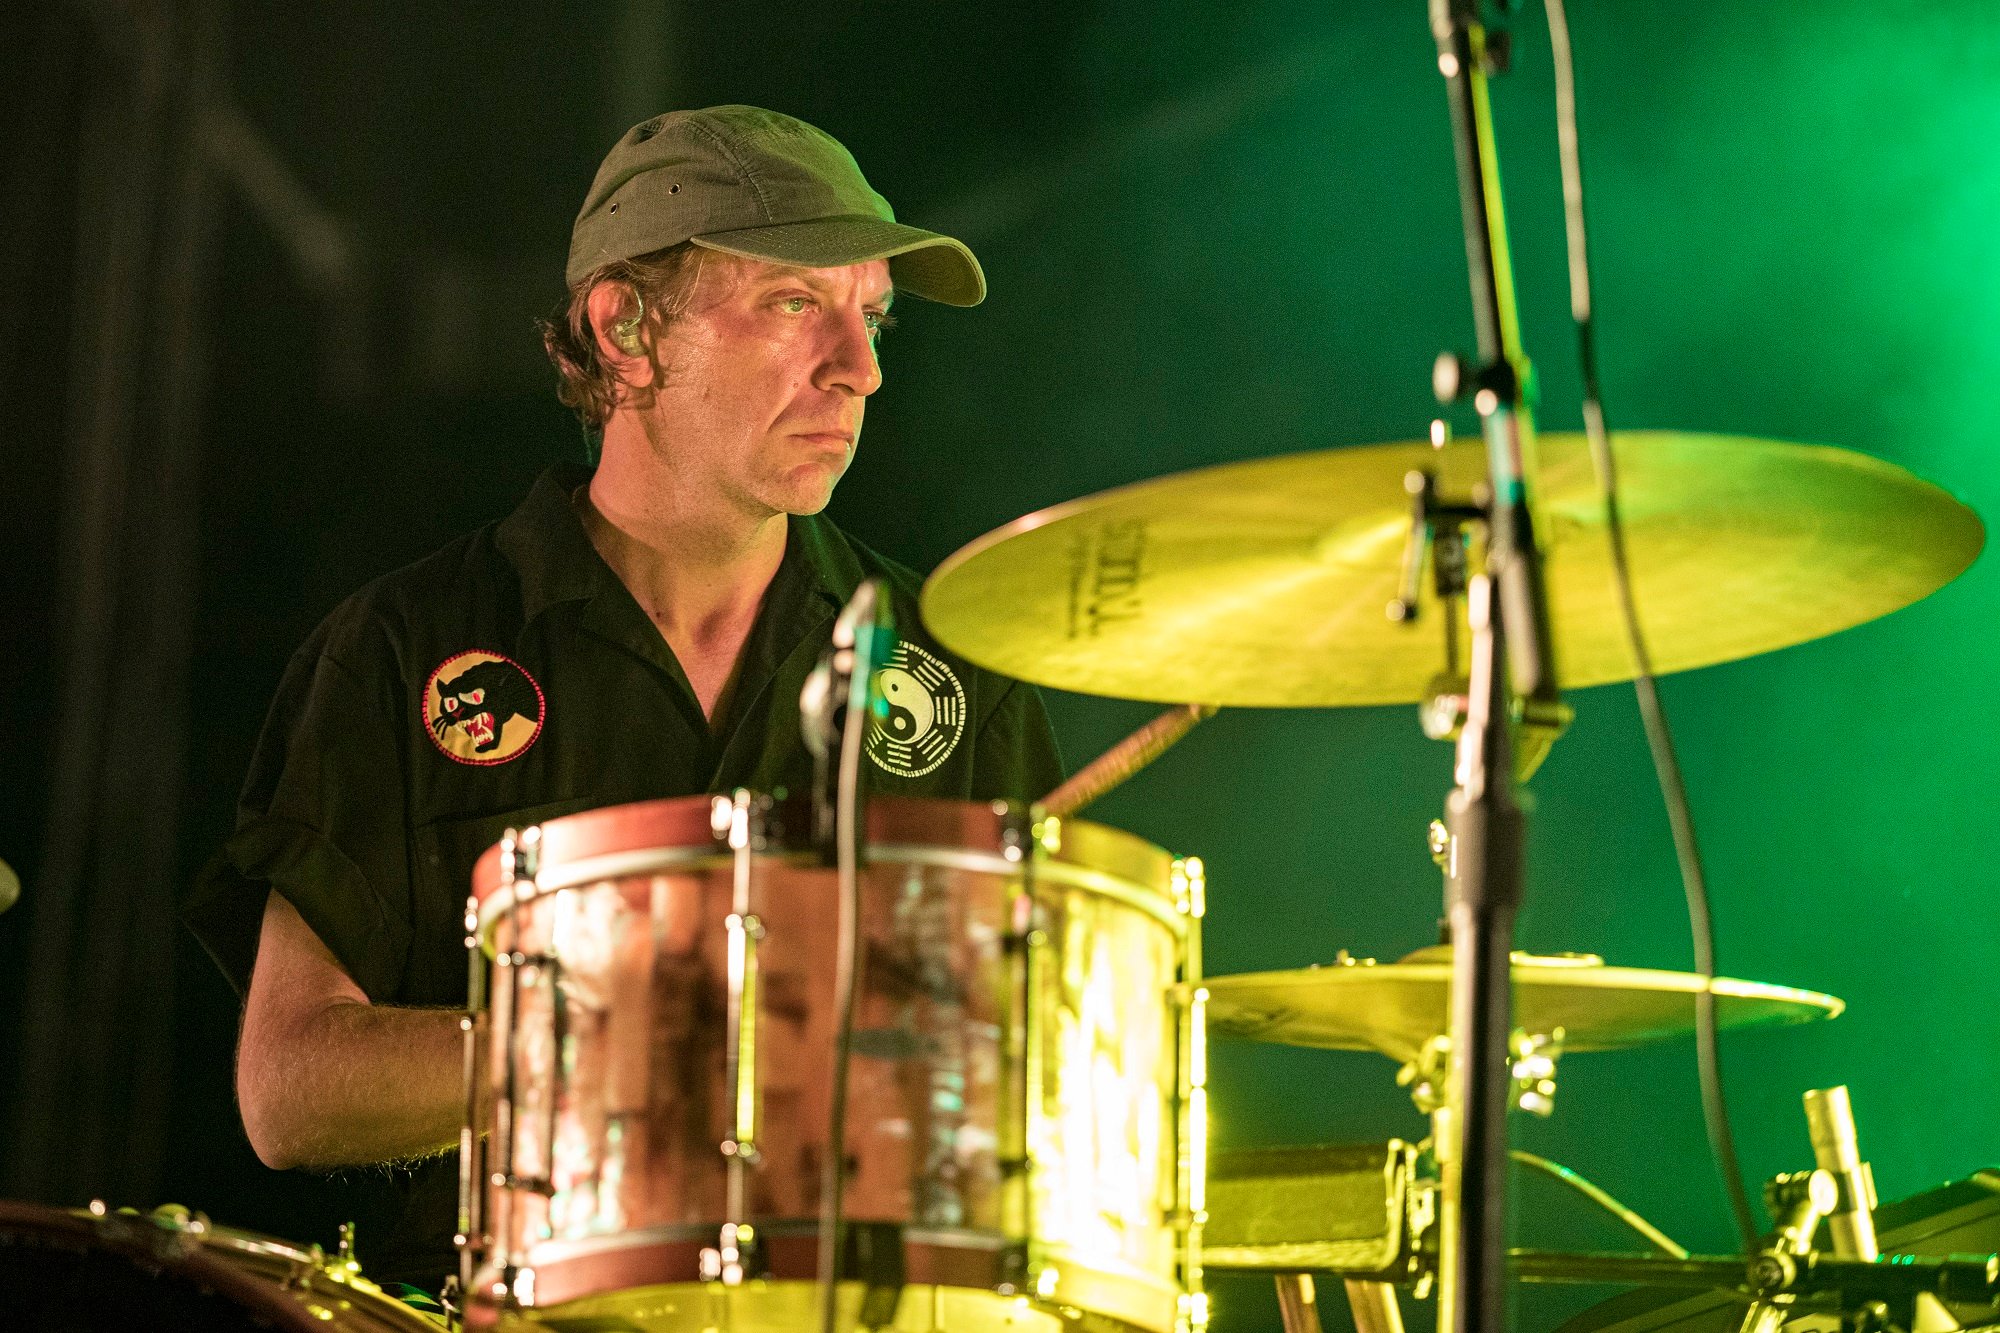 Jeremiah Green of the band Modest Mouse sits behind a drum set